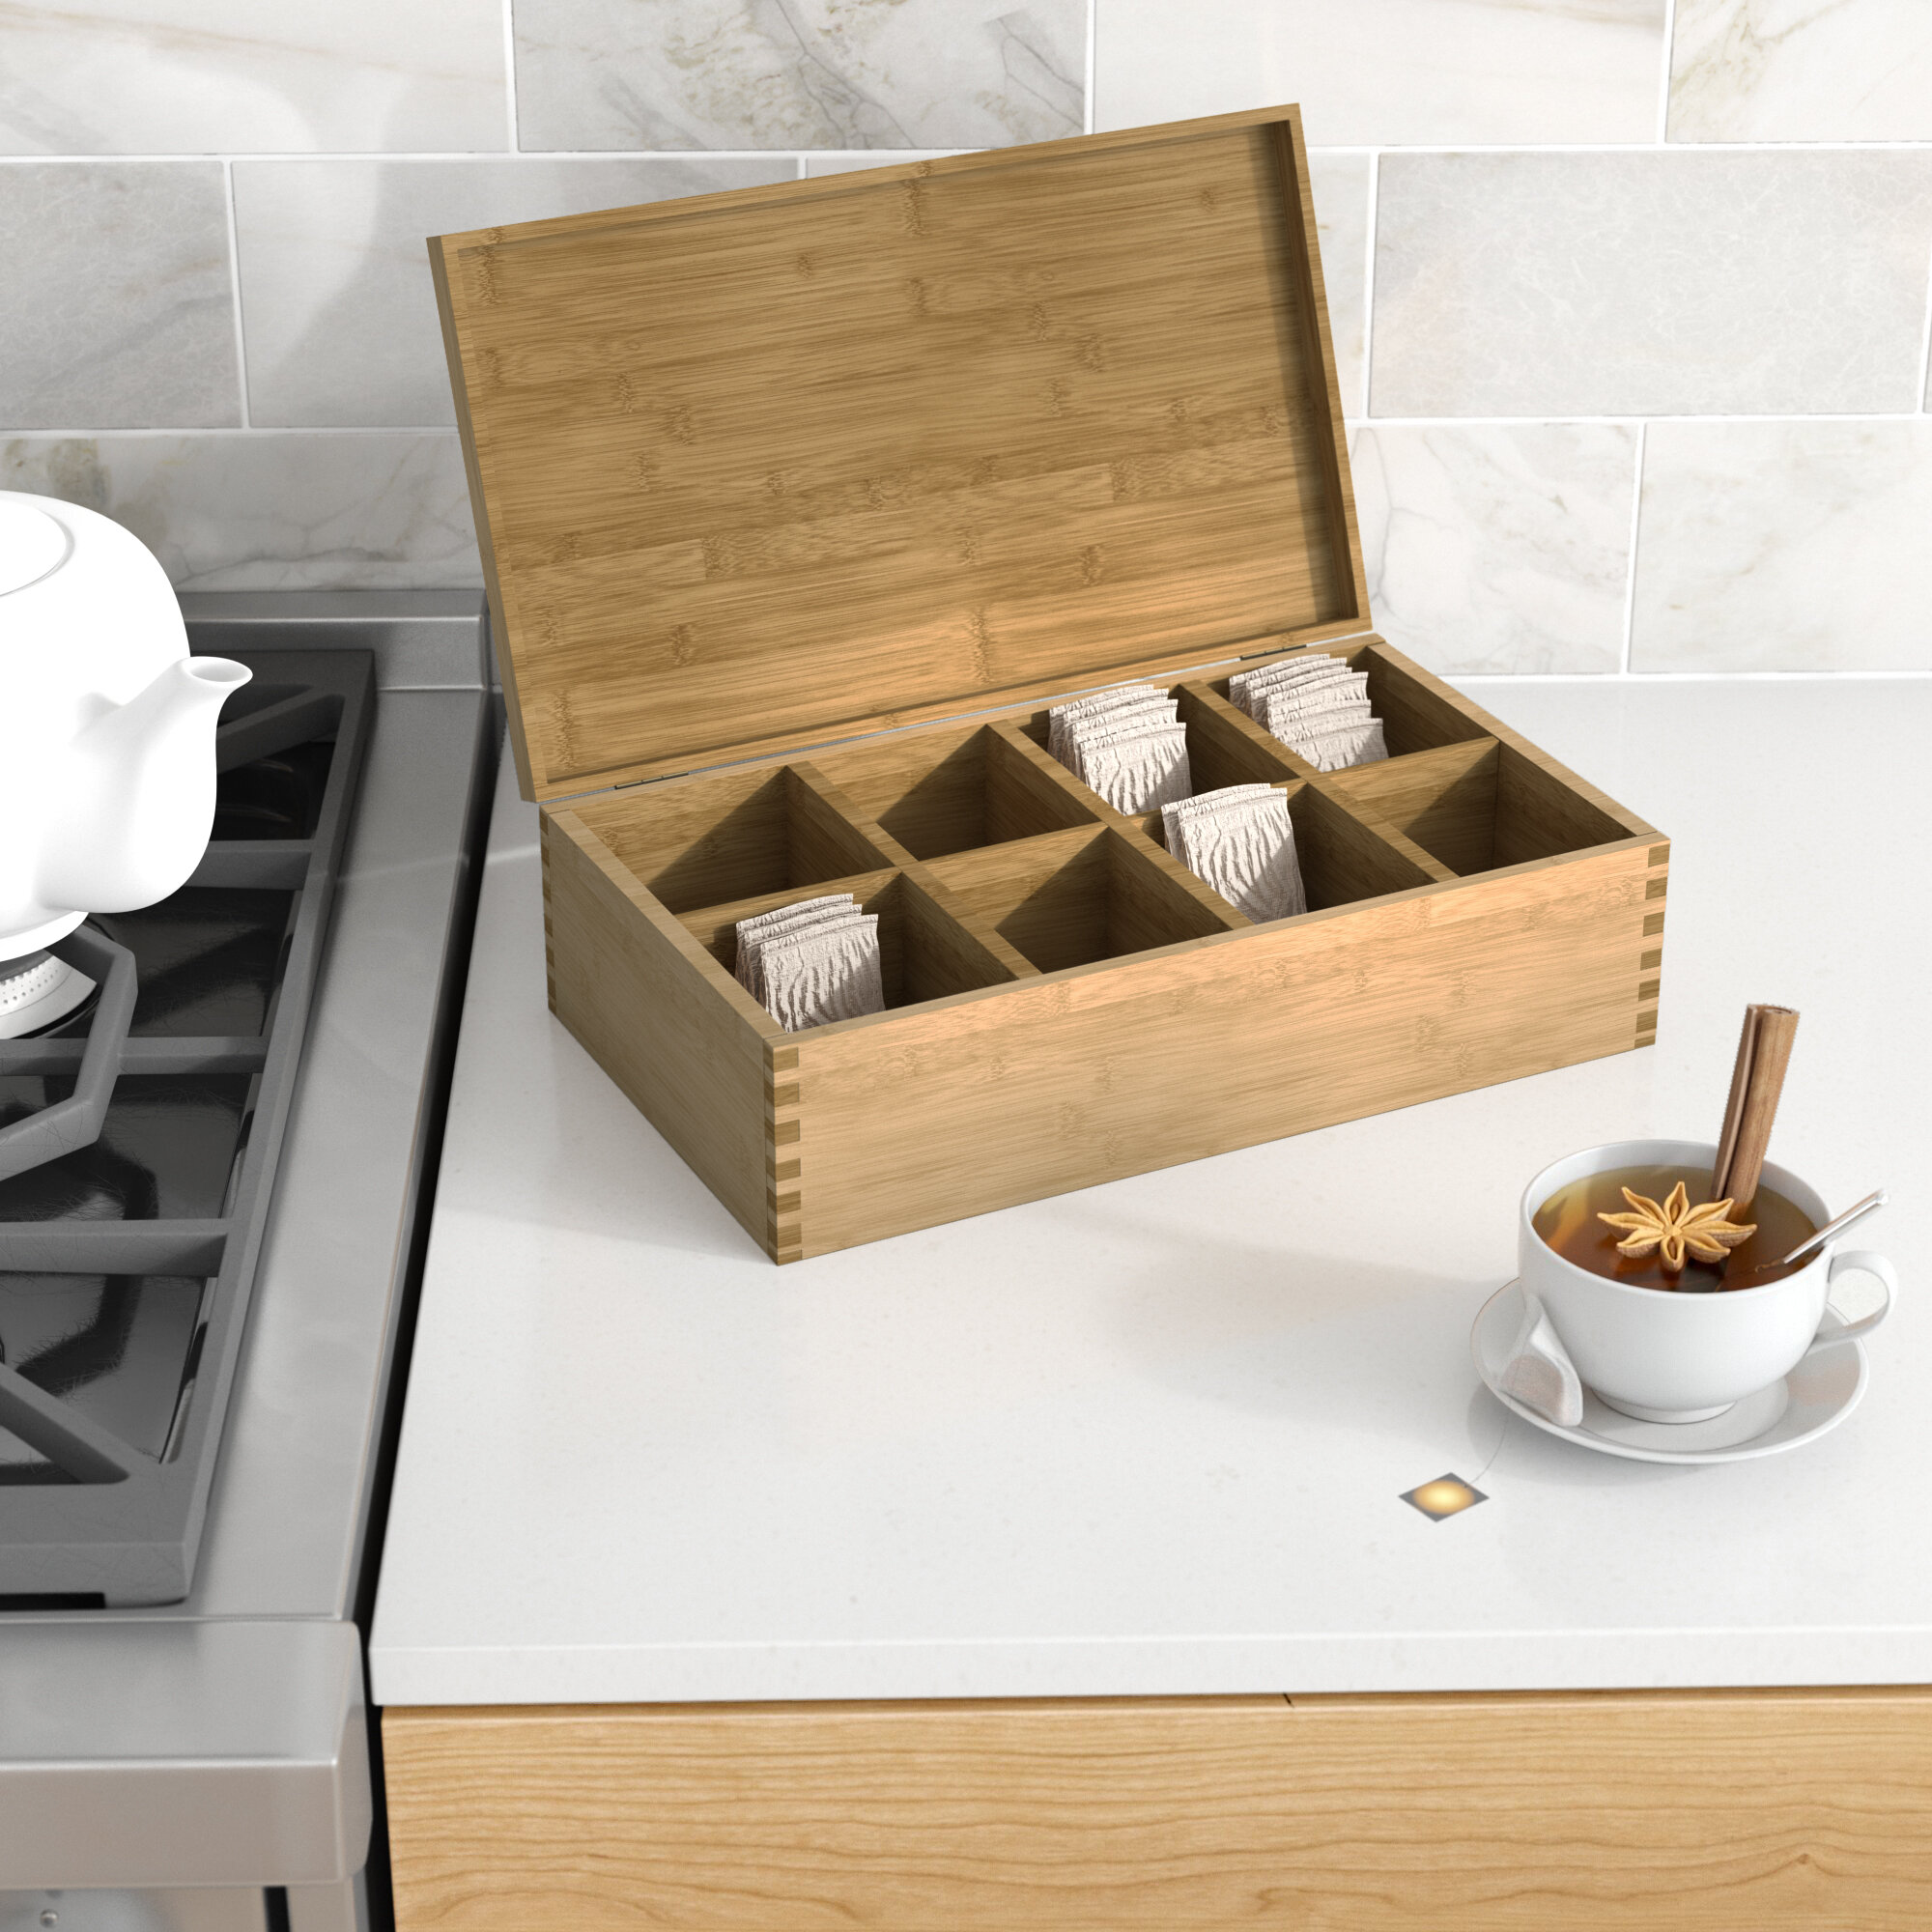 for Kitchen Tea Creamers Sugar Coffee Packets Organizing Tea Chest Storage Box 9-Compartments Wooden Tea Bag Holder Tea Organizer with Clear Lid Brown Tea Box 